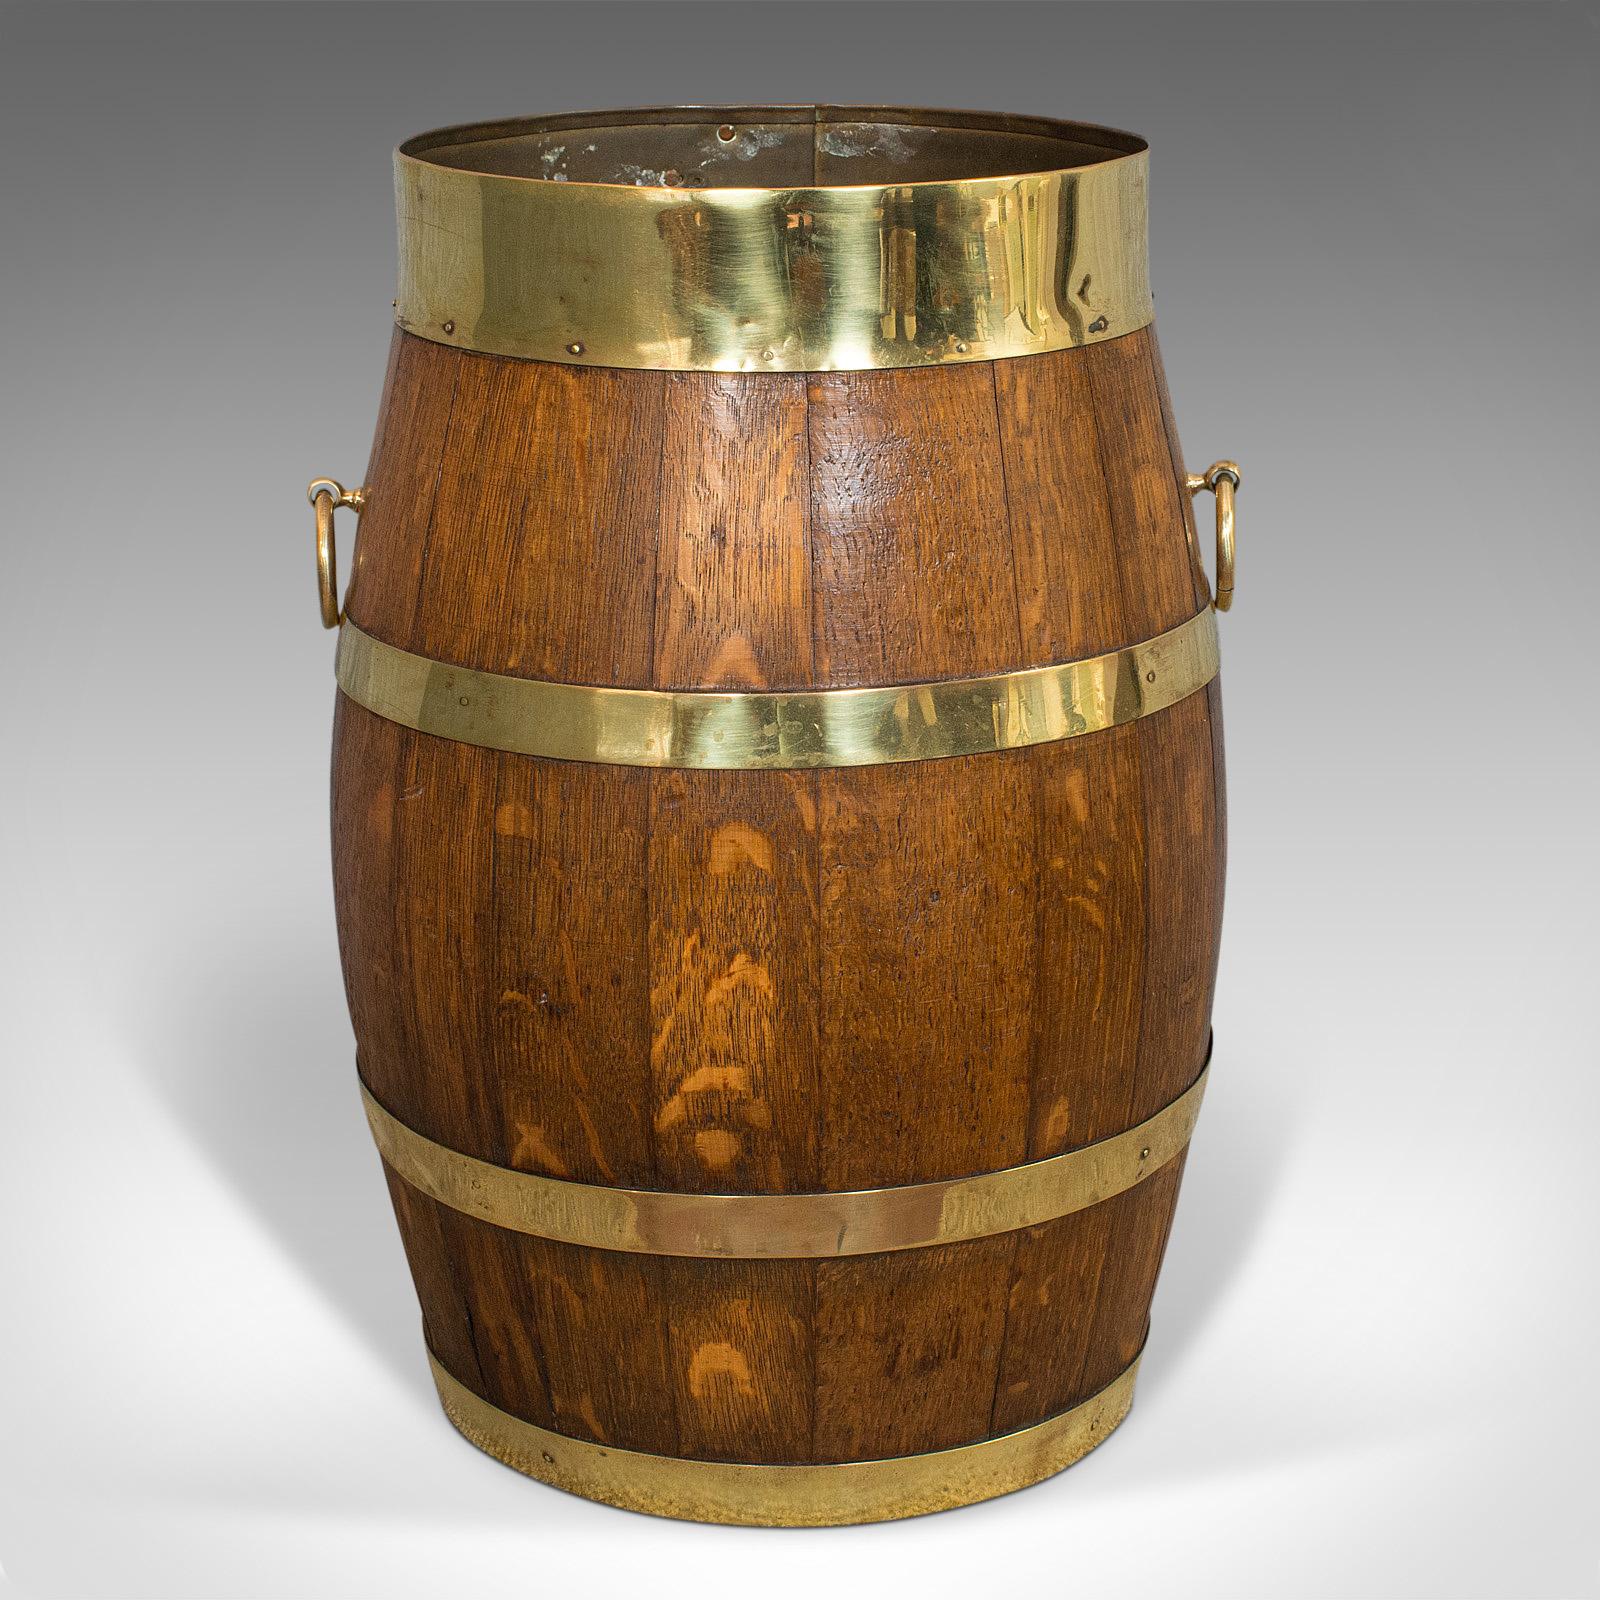 This is a vintage coopered hallway barrel. An English, oak and brass stick or umbrella stand, dating to the early 20th century, circa 1930.

Wonderfully tonal hallway stand
Displays a desirable aged patina
Oak staves with rich colour and wisps